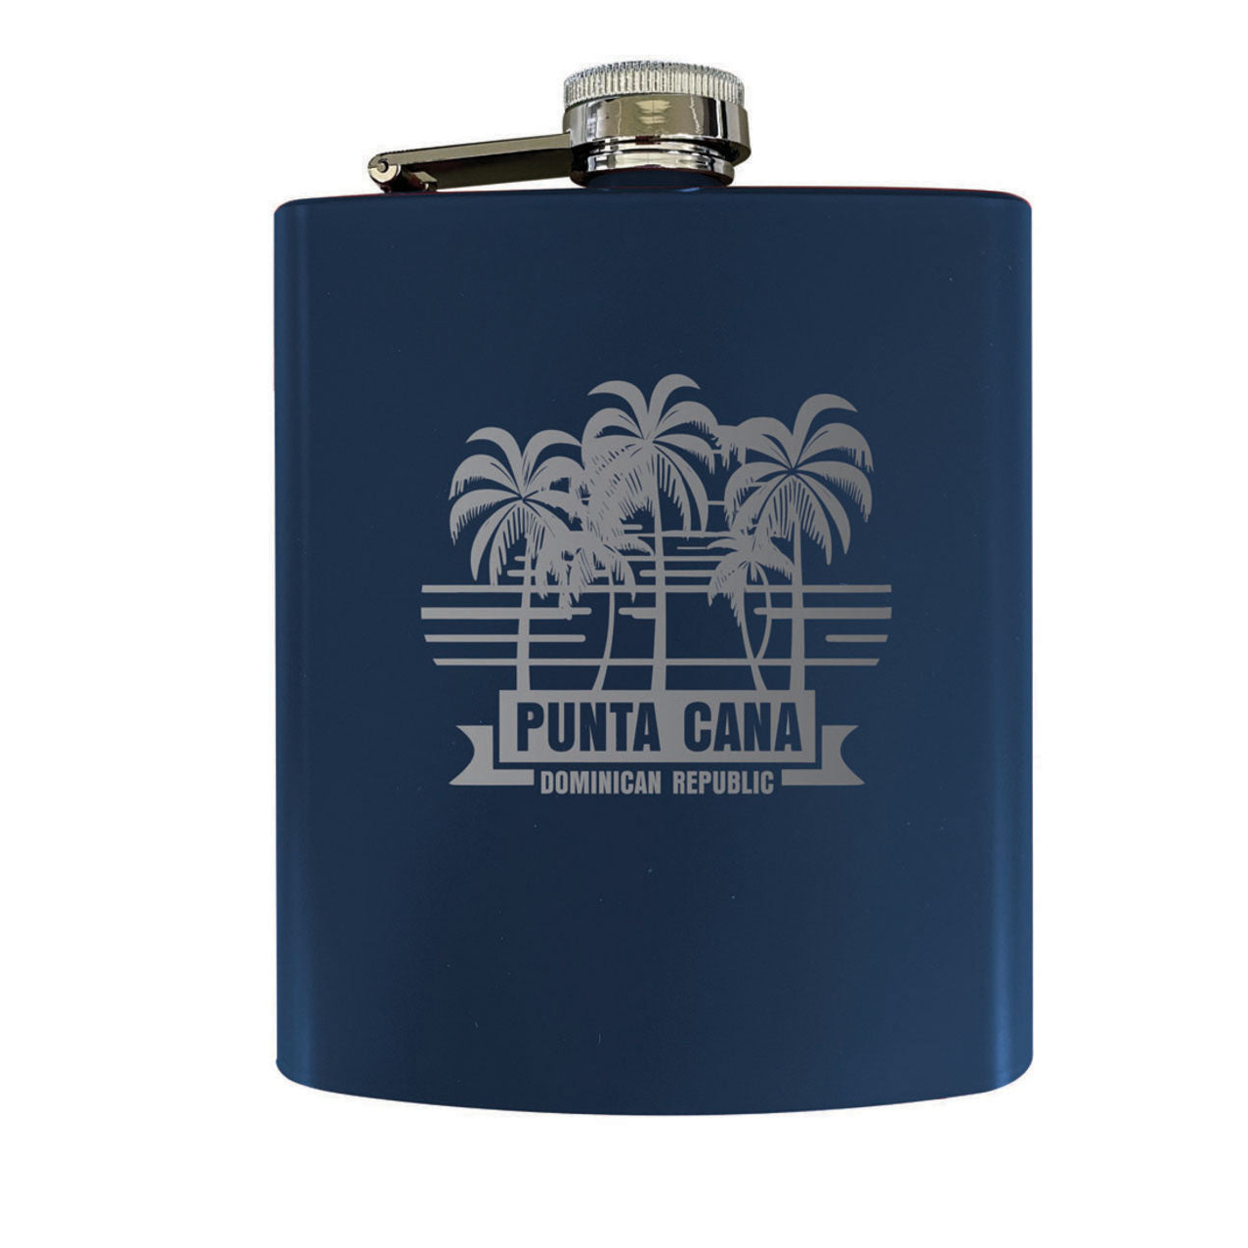 Punta Cana Dominican Republic Souvenir Engraved Matte Finish Stainless Steel 7 Oz Flask - Red, PALMS